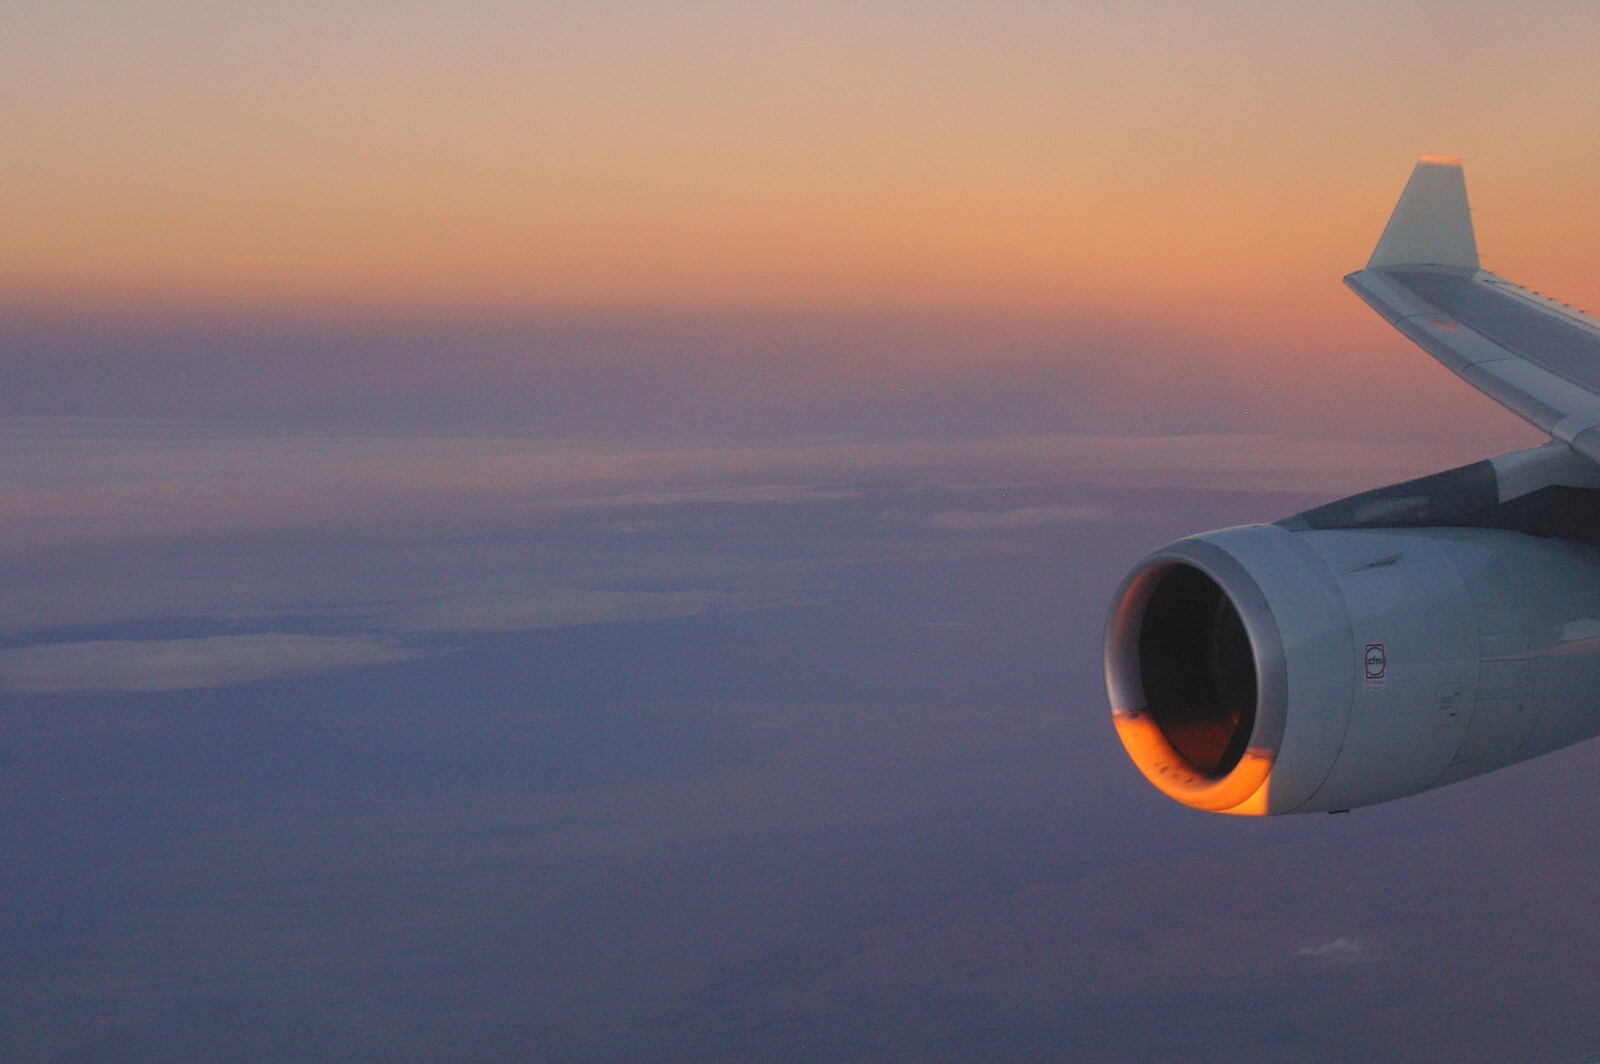 Sunset on the Airbus A-340 over the Gobi Desert from A Few Days in Nanjing, Jiangsu Province, China - 7th October 2006